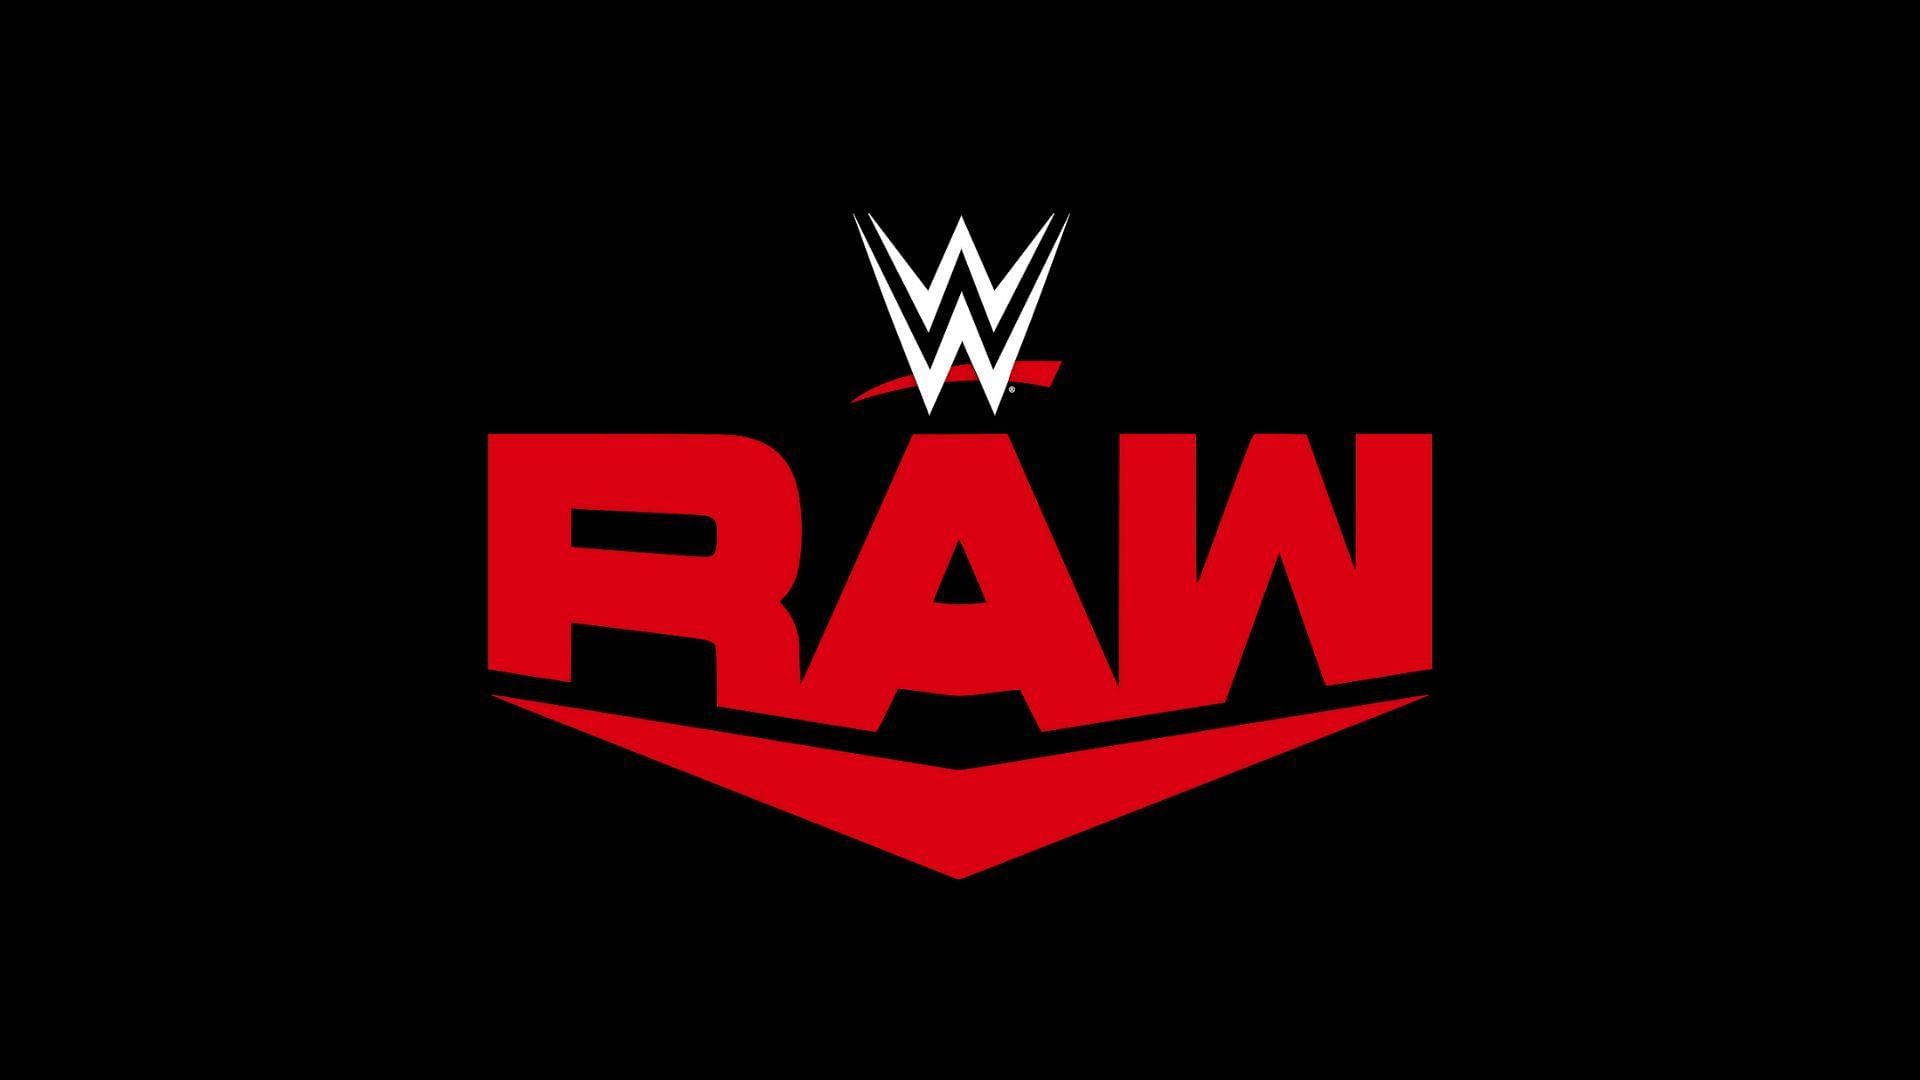 WWE RAW will host the second night of the draft